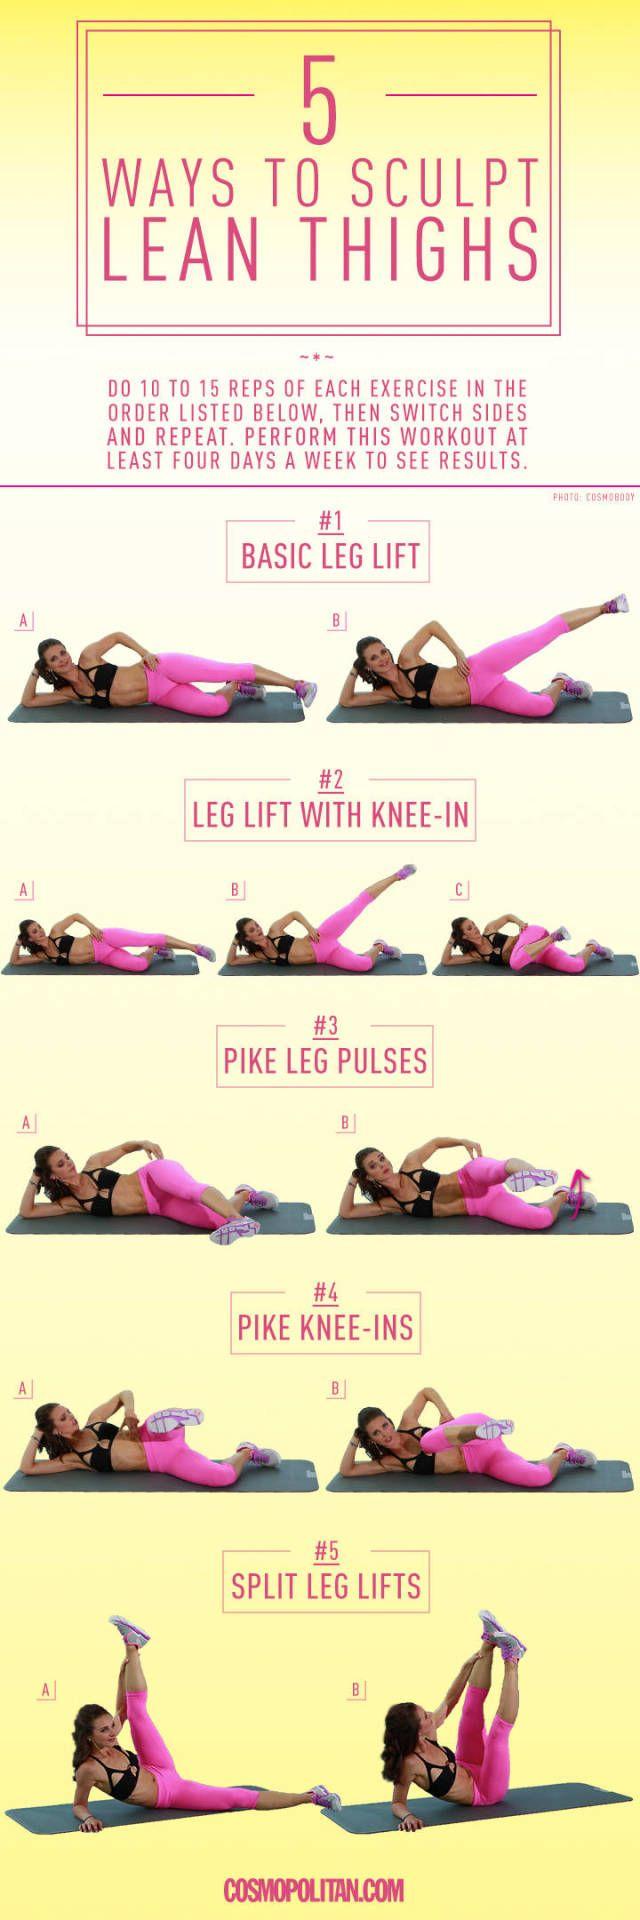 Wedding - 5 Ways To Sculpt Lean Thighs From The Floor